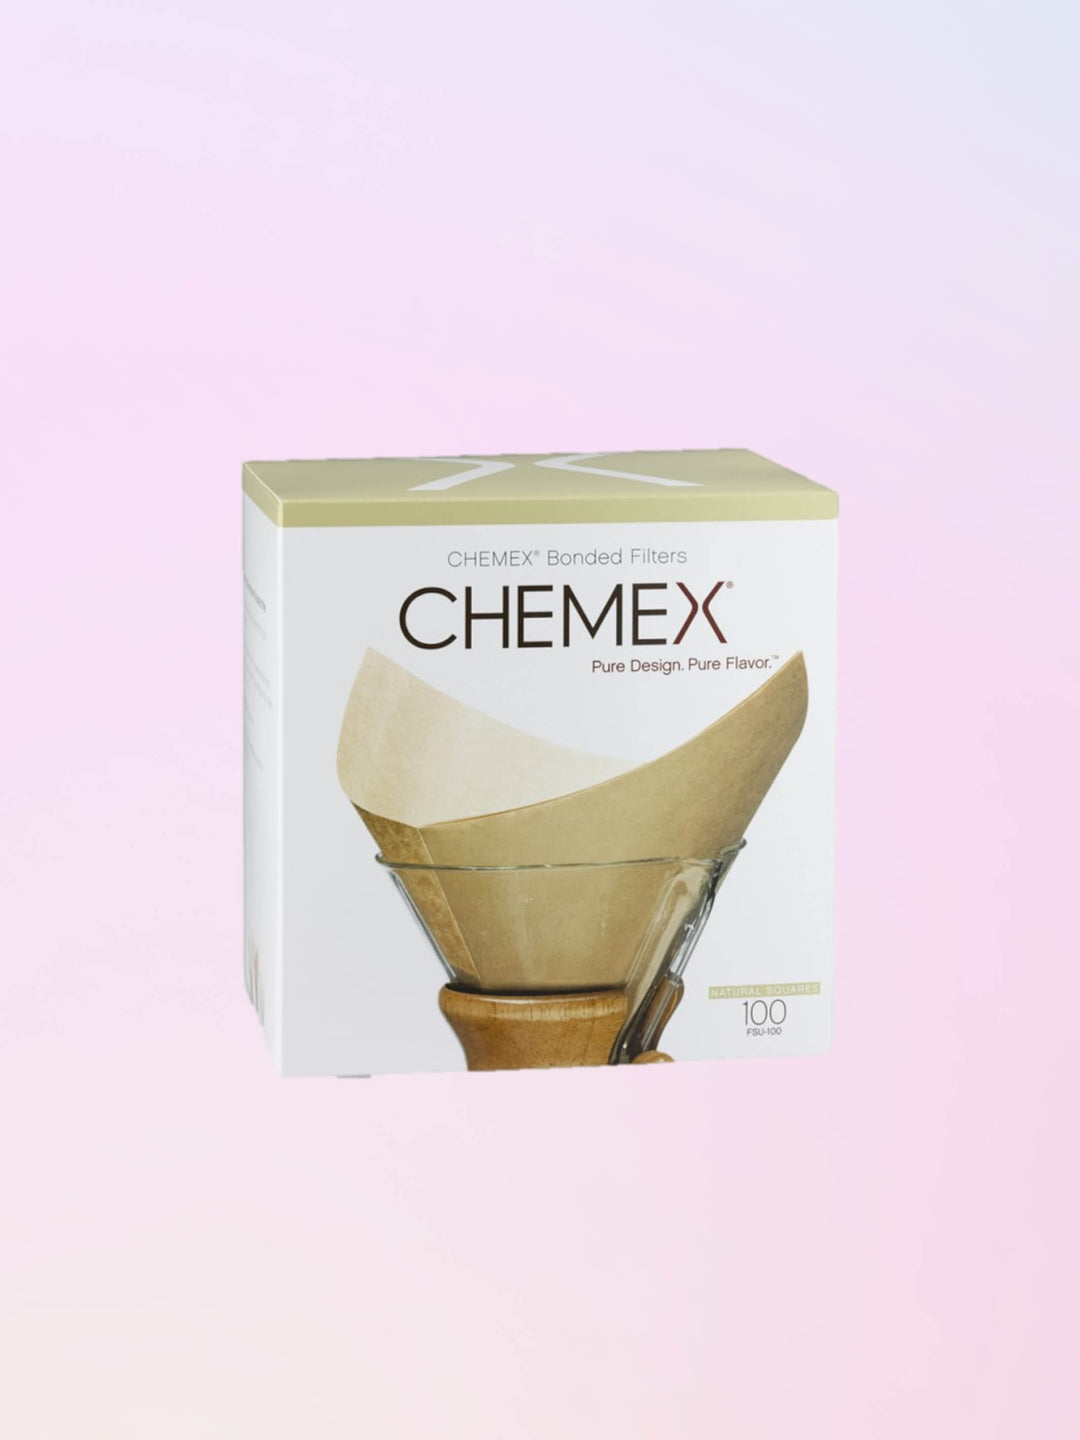 Chemex natural square filters.